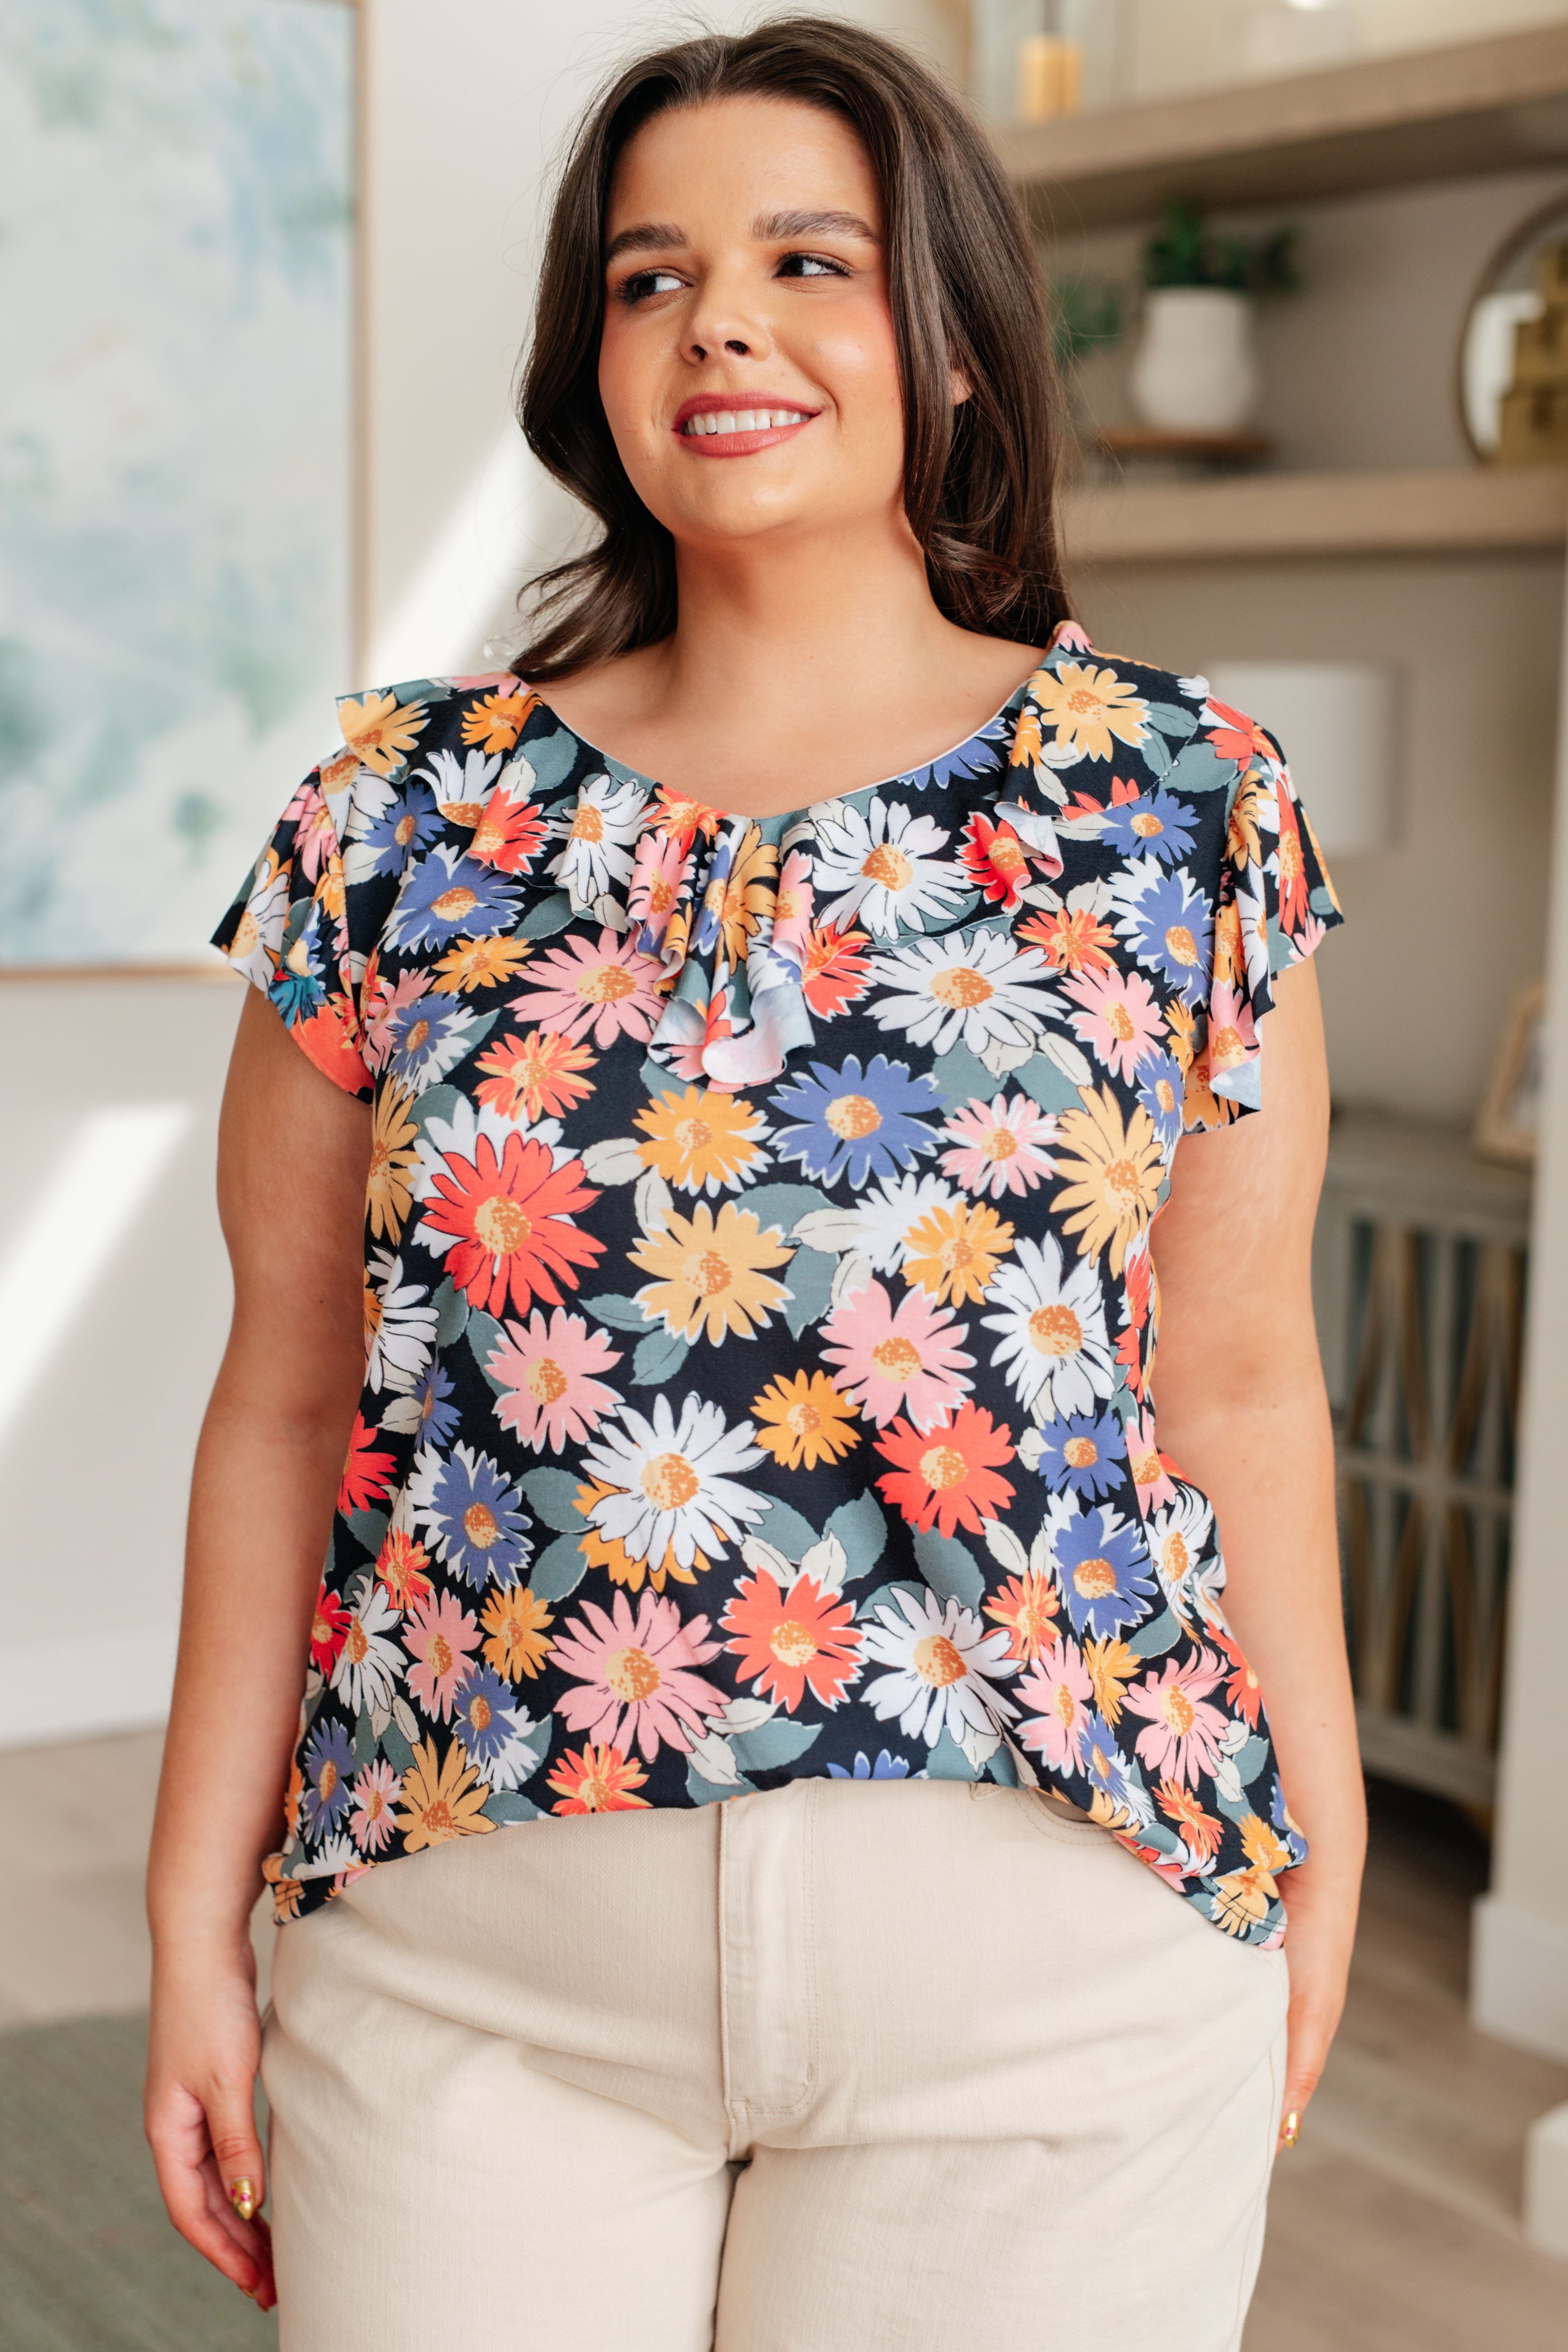 Flower Power Floral Top Womens Ave Shops   